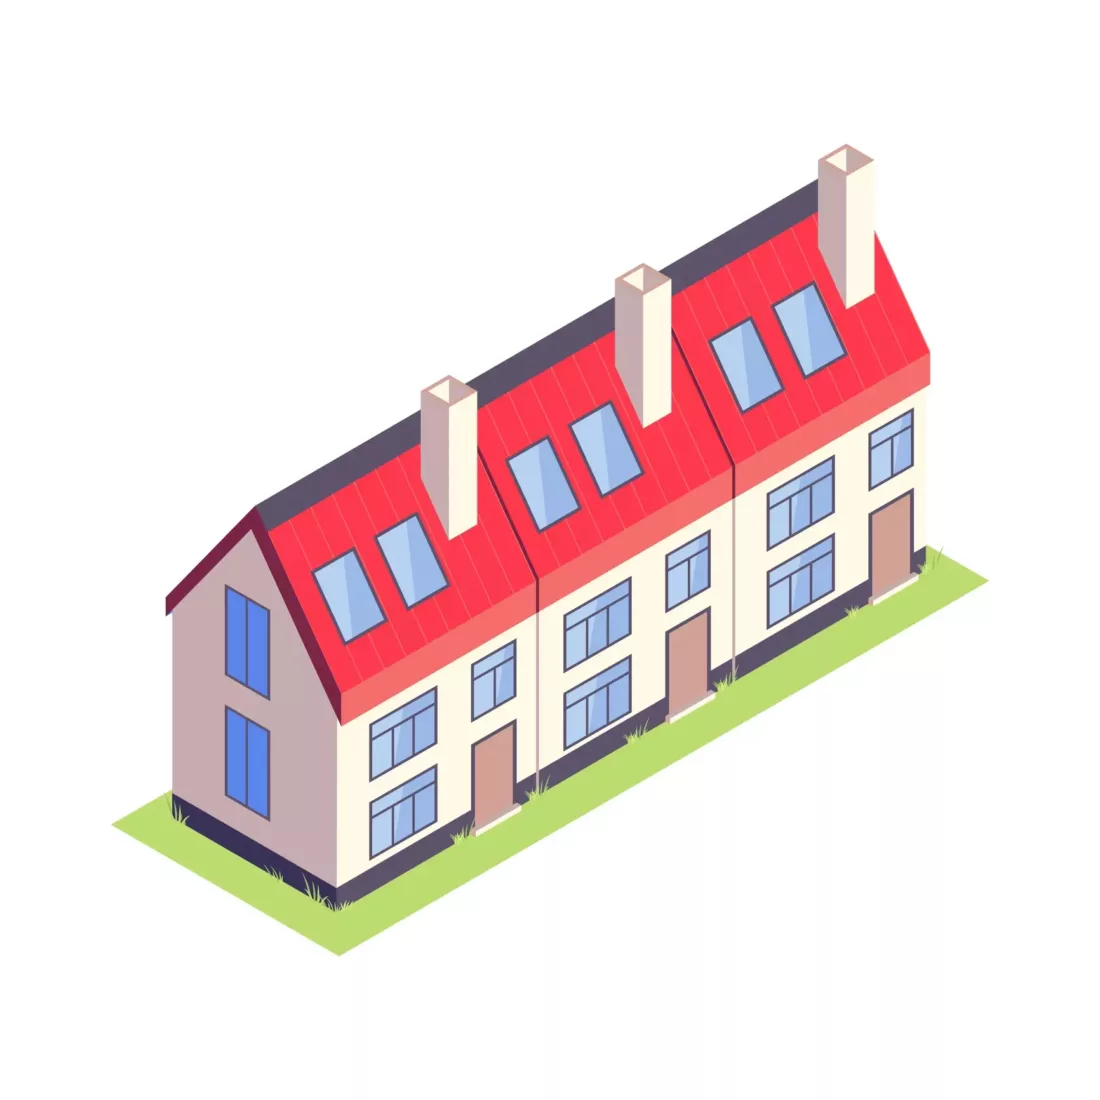 Detached Houses Isometric